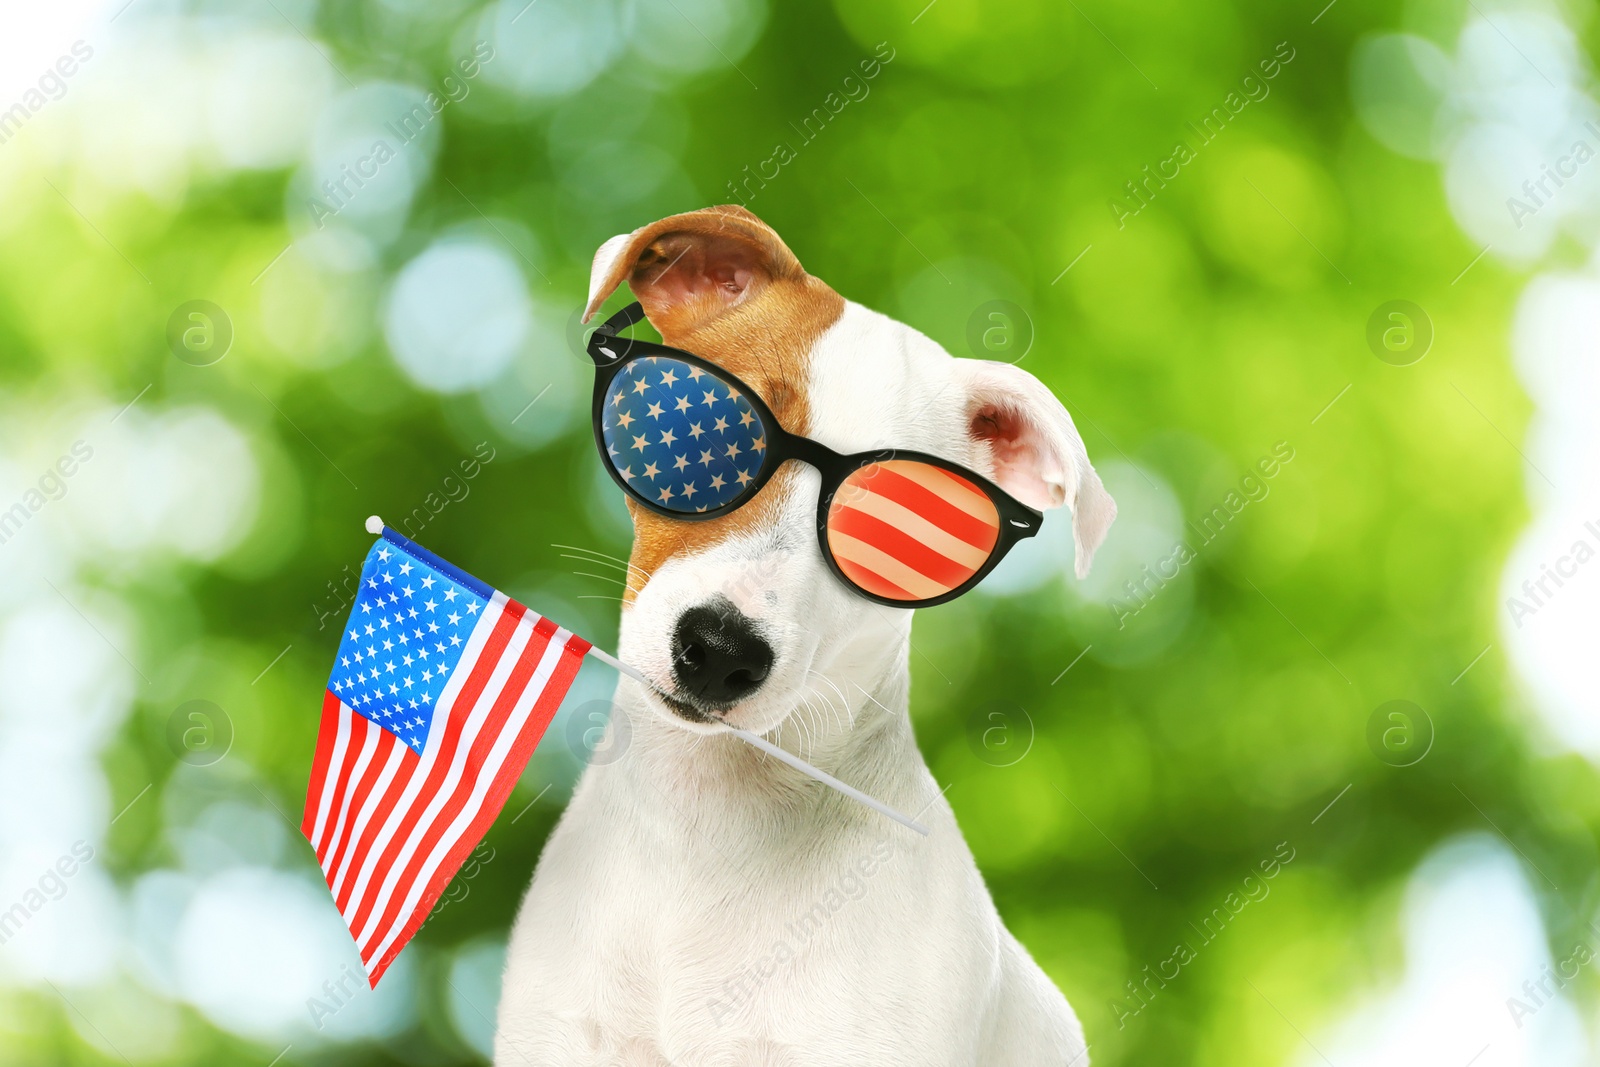 Image of 4th of July - Independence Day of USA. Cute dog with sunglasses and American flag on blurred green background, bokeh effect